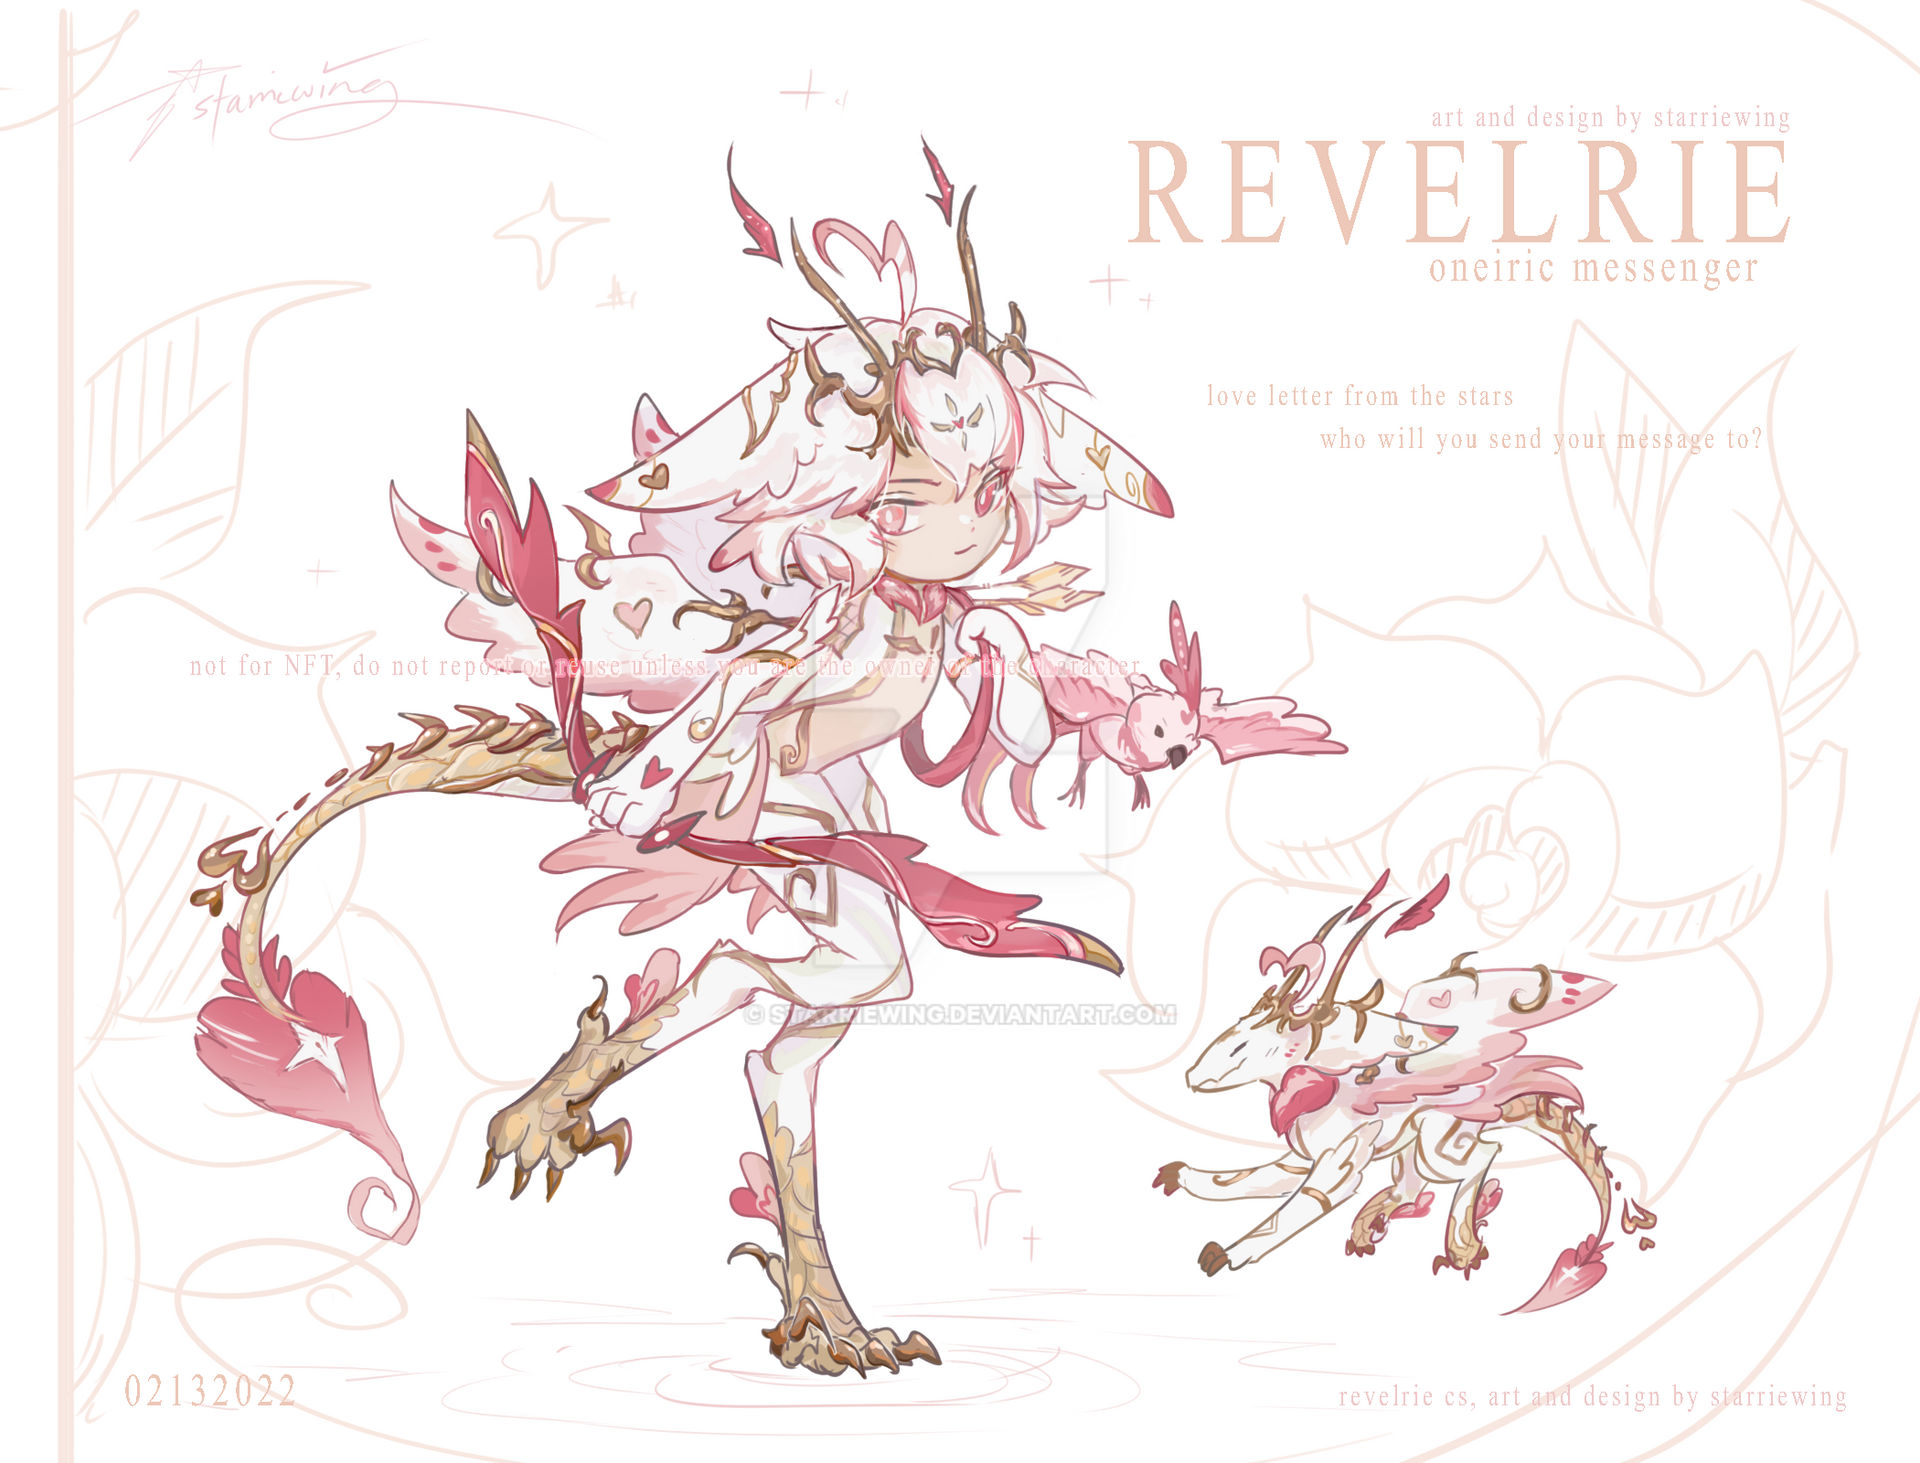 auction_valentine_revelrie__open__by_sta